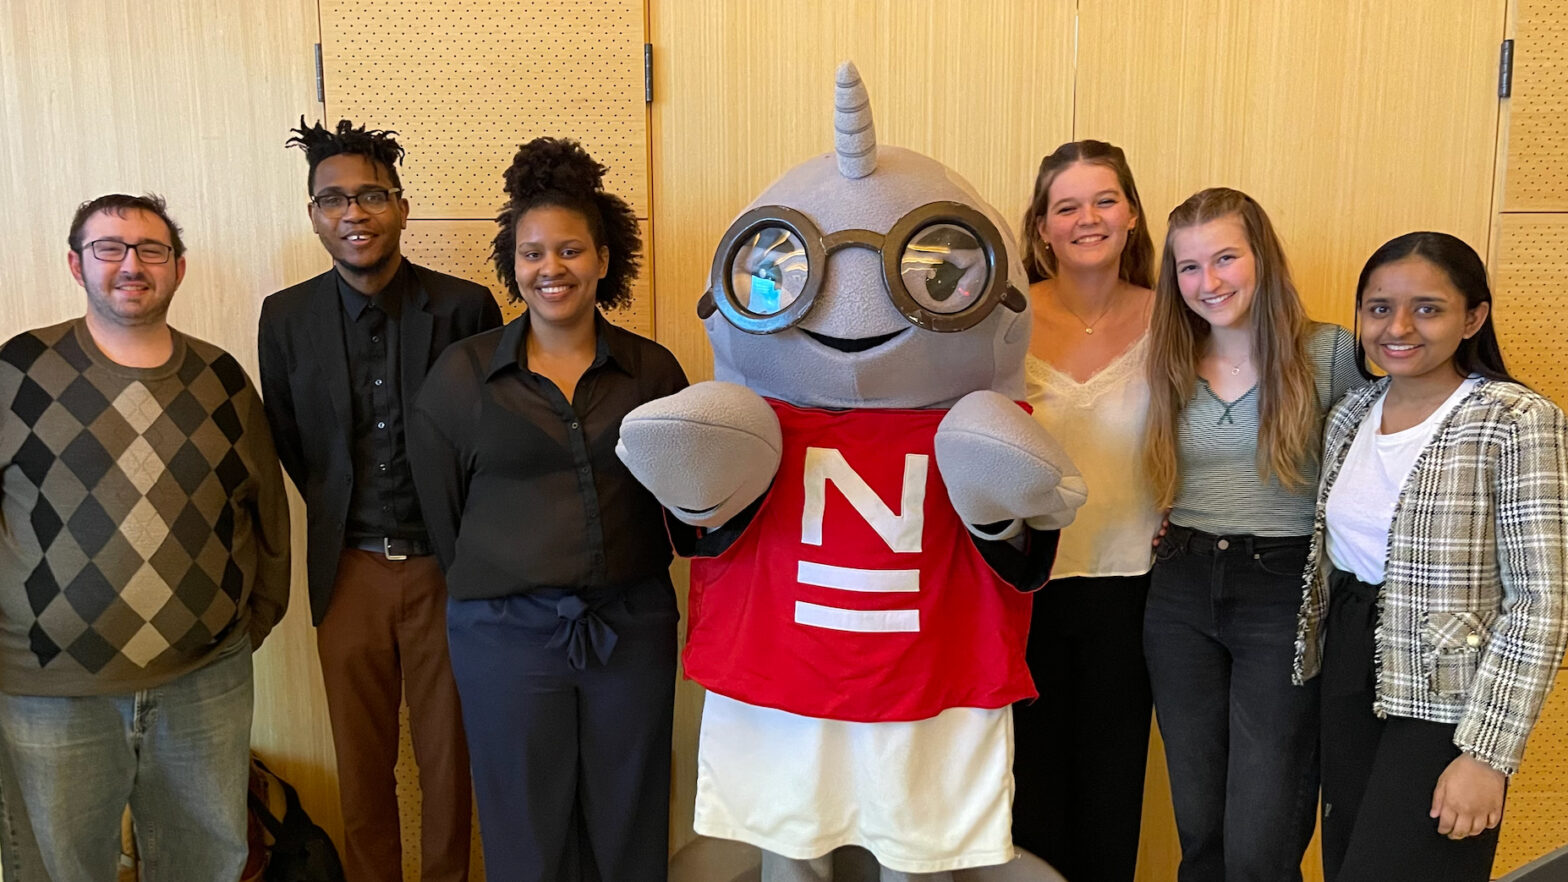 A photograph of The New School’s mascot, Gnarls, with five Student Senators and a USS advisor standing next to them. There are three people on each side of Gnarls. All are standing in front of a brown wall in a New School building.